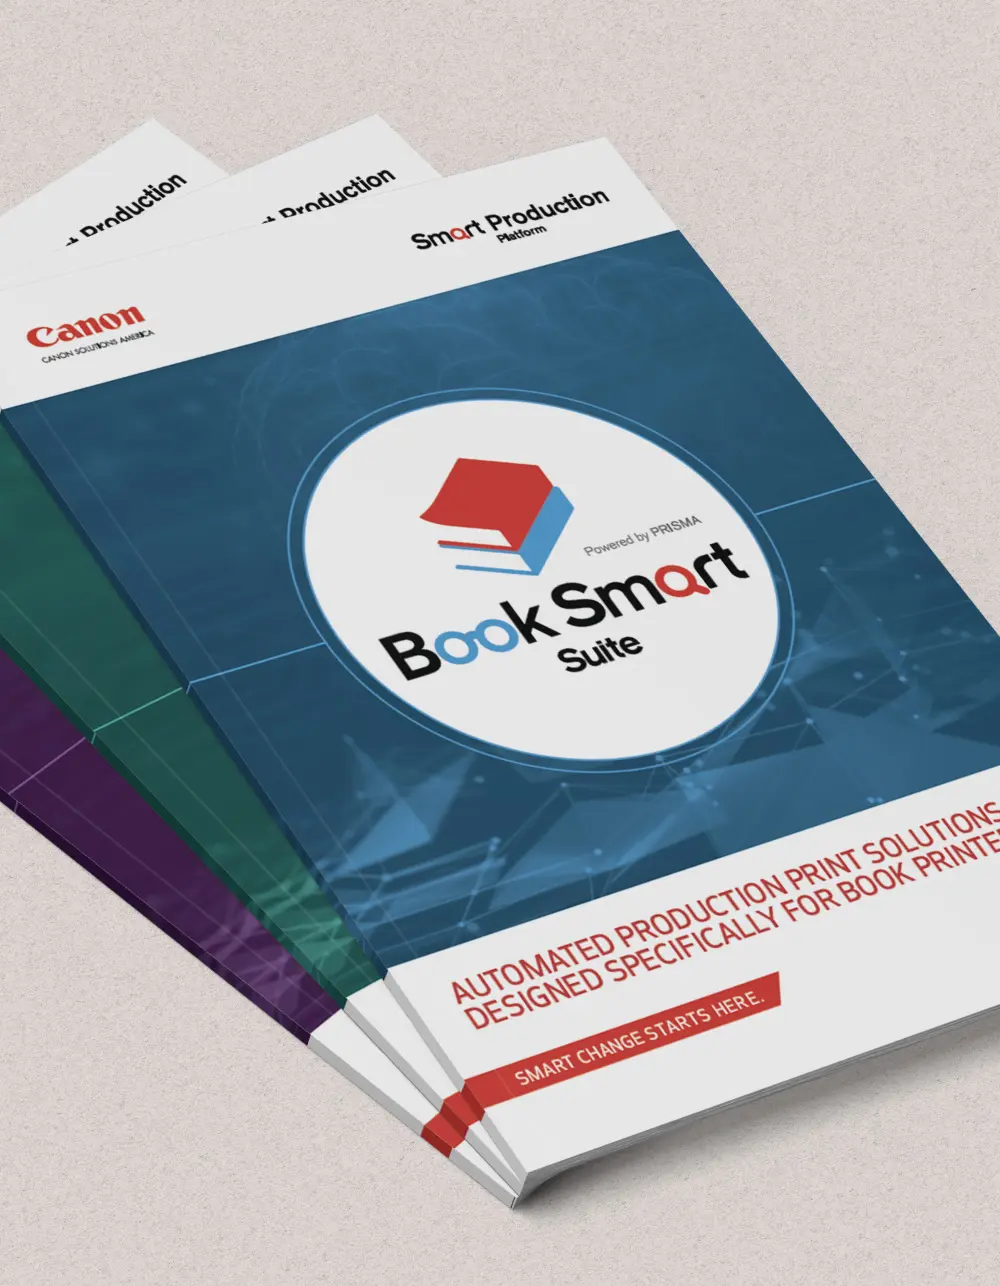 Stack of Book Smart Suite brochures we produced introducing a printing workflow automation platform.